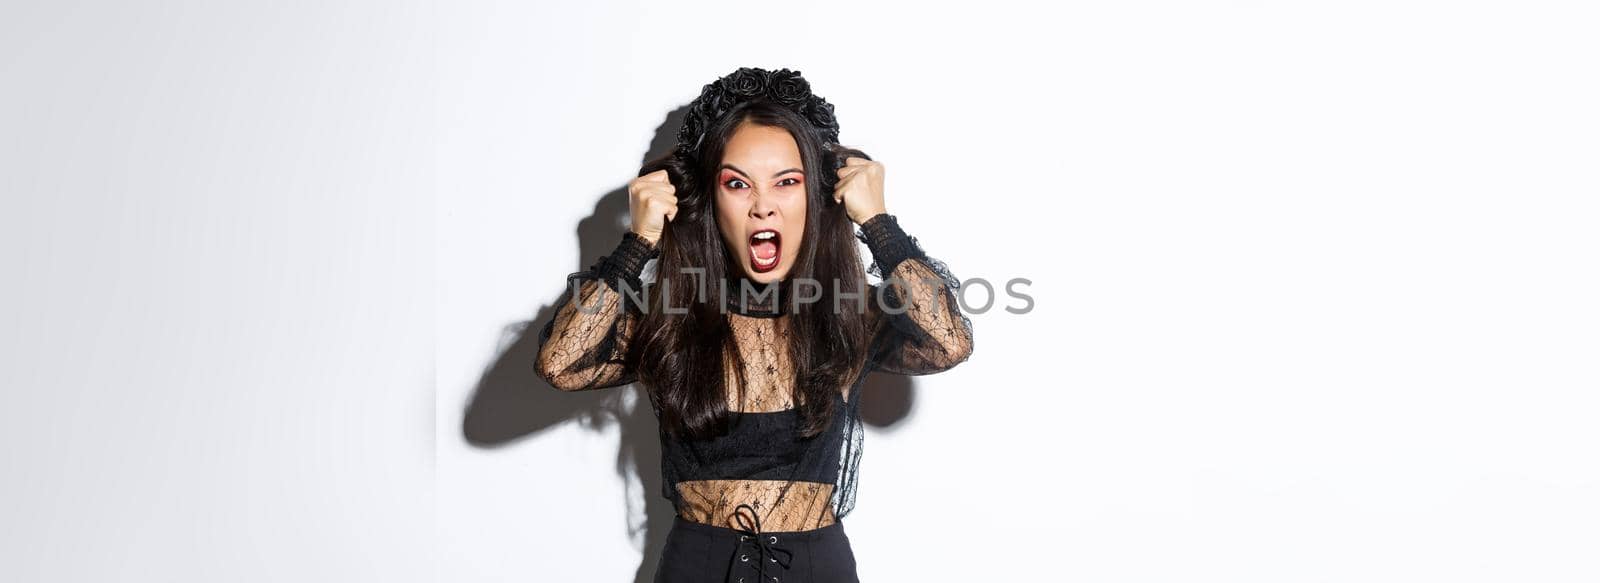 Angry asian woman impersonate evil witch on halloween party, looking mad and furious, screaming to scare people, standing over white background in gothic dress.